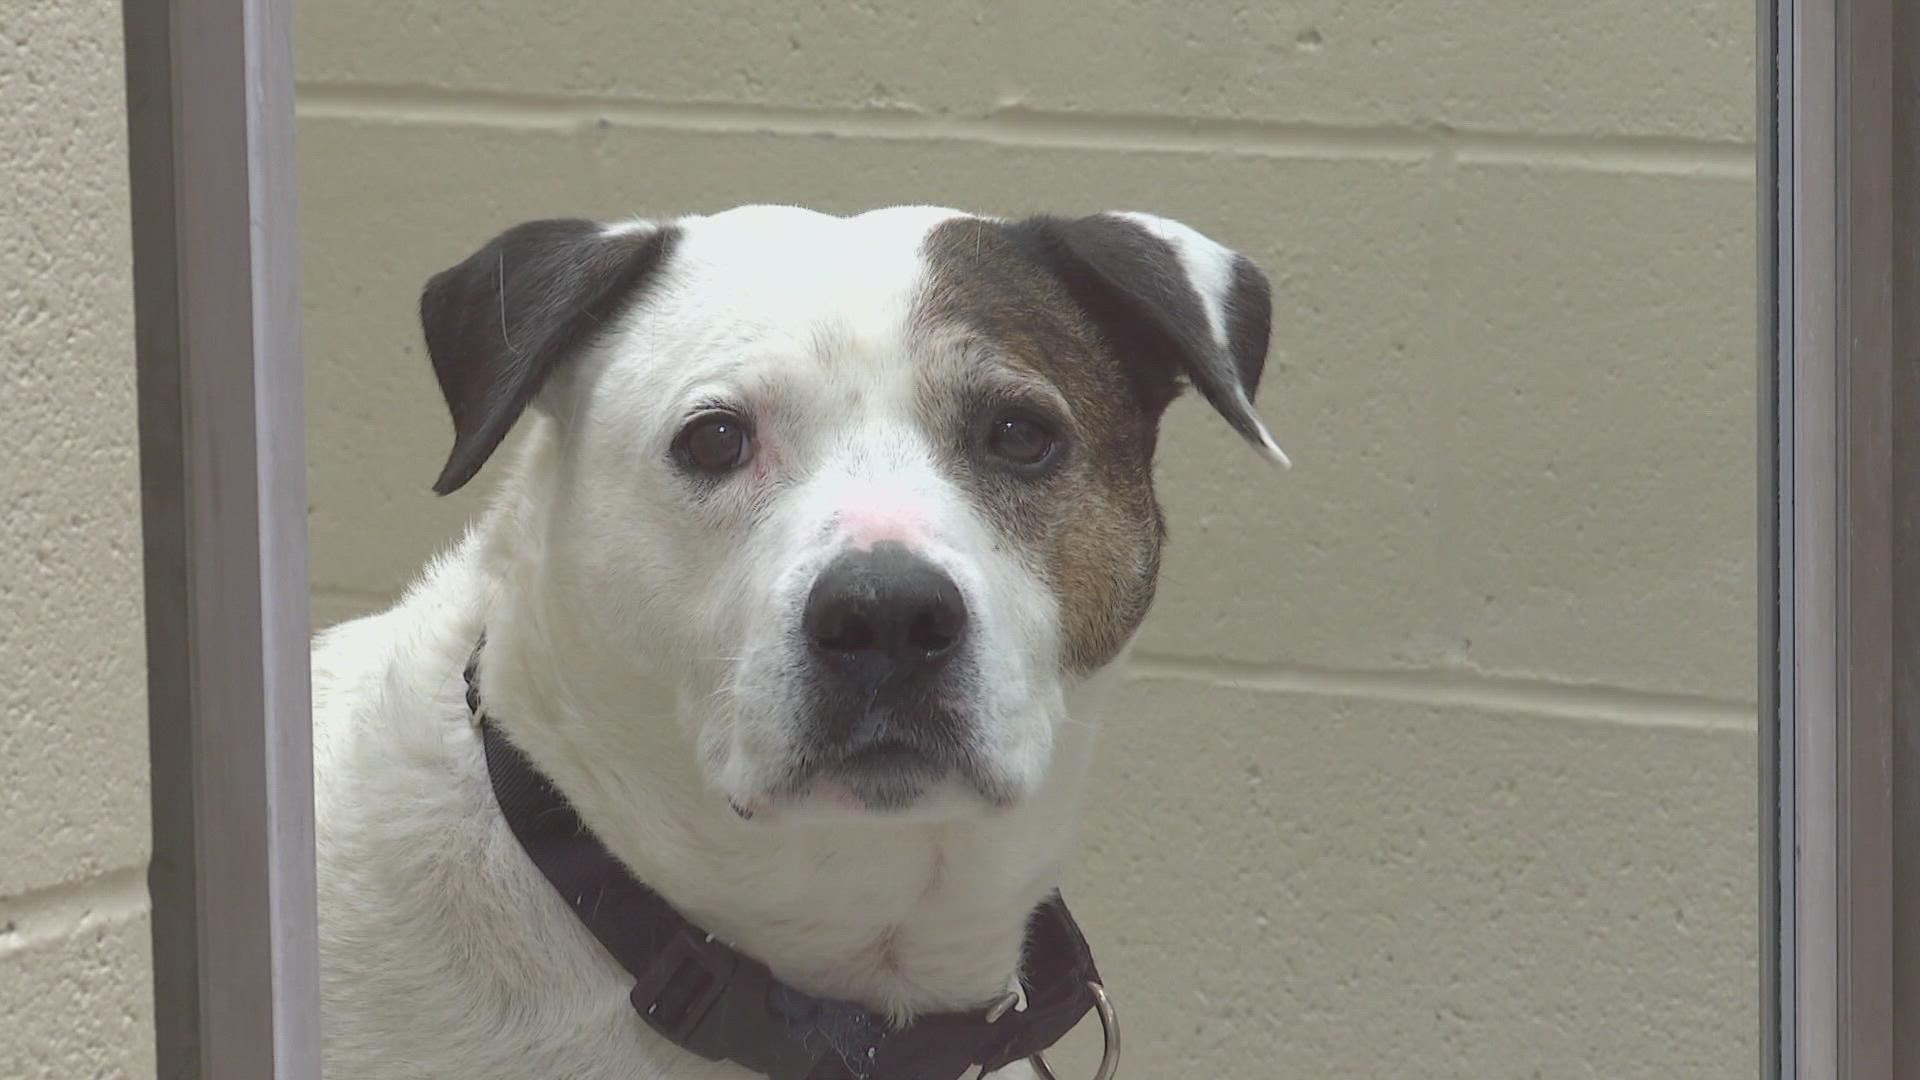 Adopters will be able to donate as little as $1 to take home a furry friend.